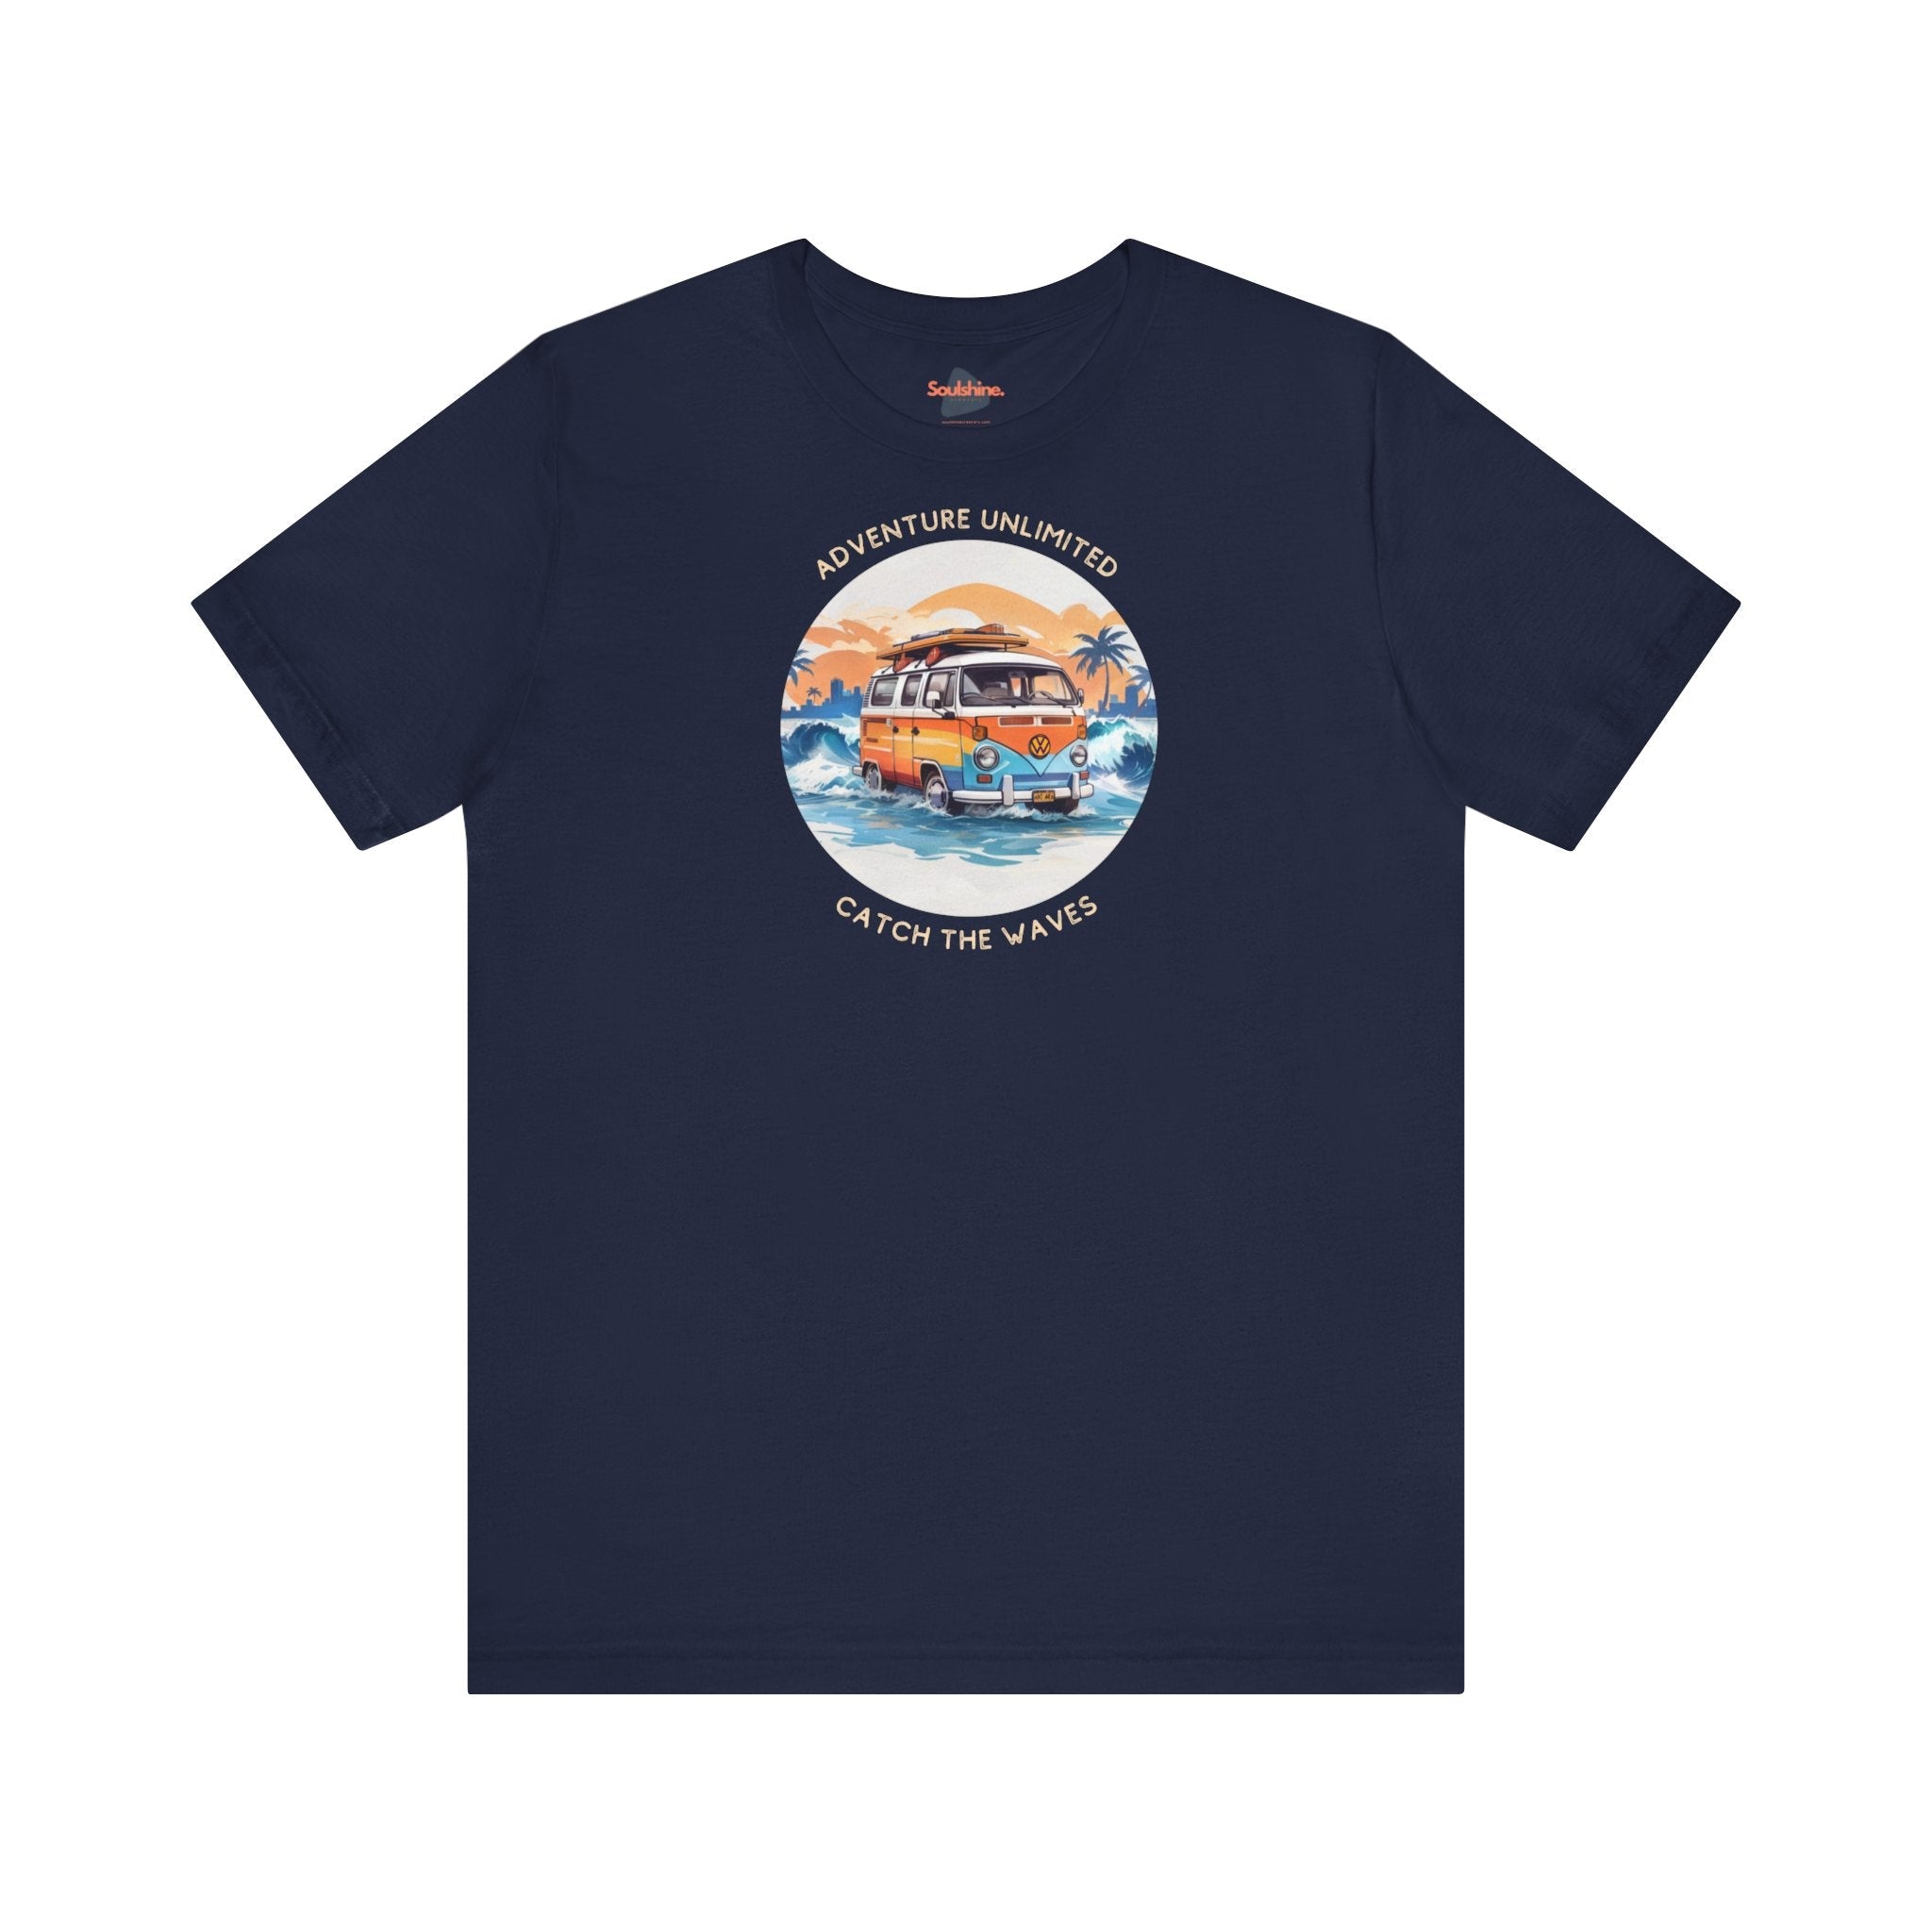 Adventure Unlimited - Surfing T-Shirt - Soulshinecreators - Navy, ’On the Water’ Printed Item